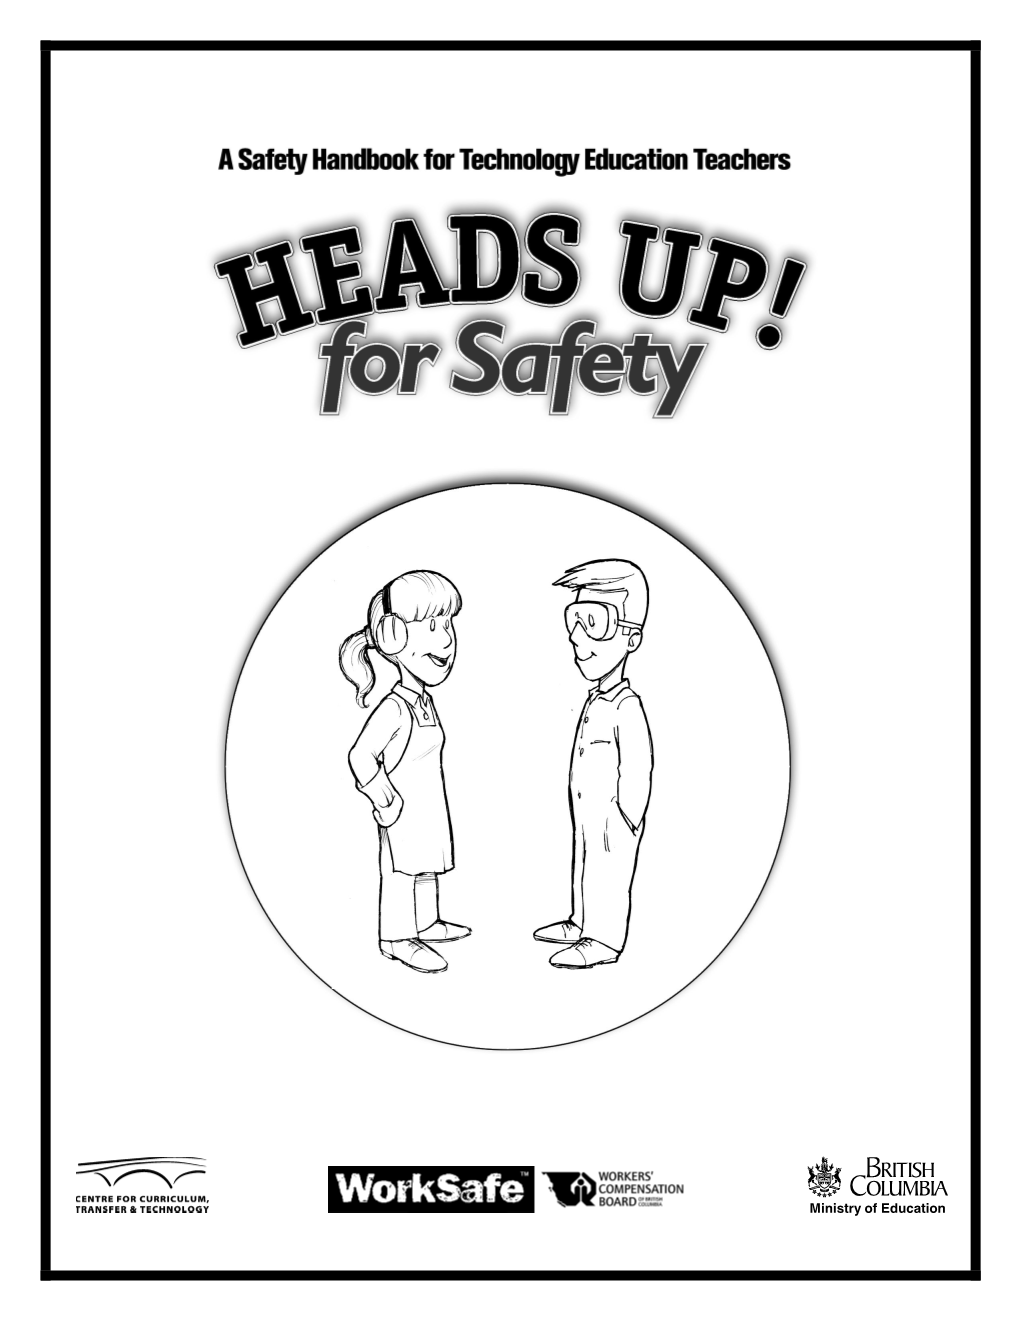 HEADS UP! for Safety